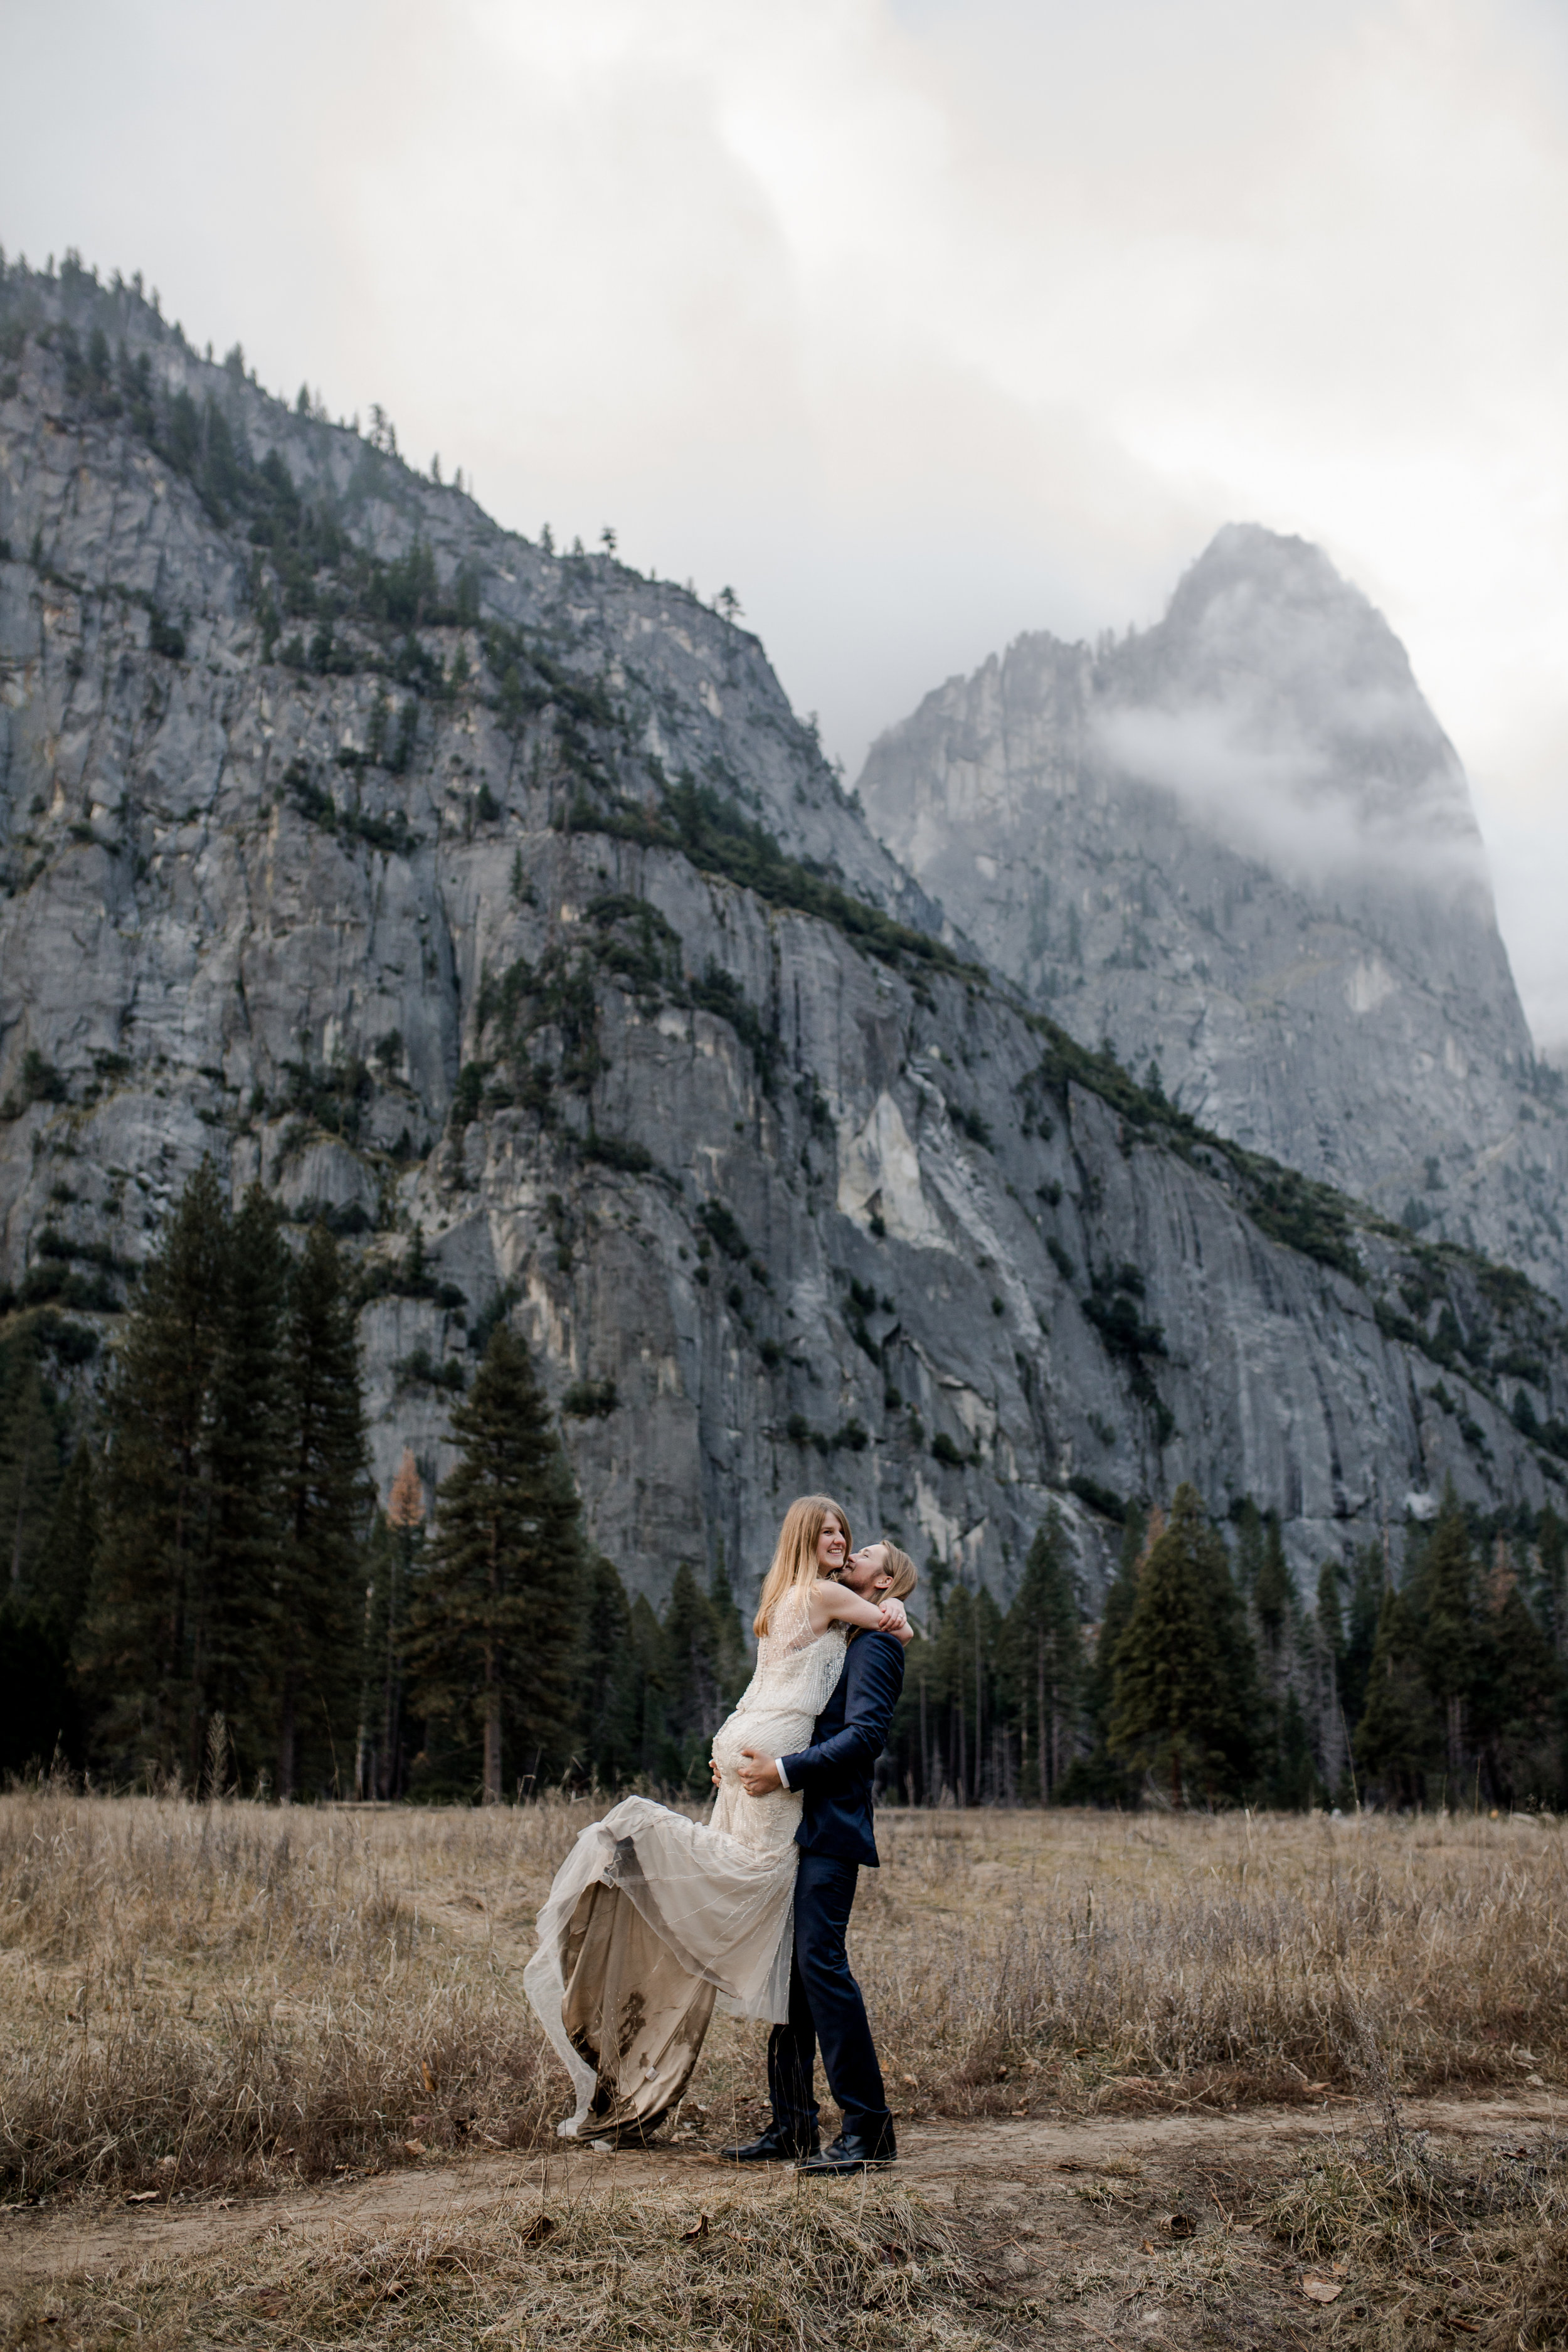 nicole-daacke-photography-yousemite-national-park-elopement-photographer-winter-cloud-moody-elope-inspiration-yosemite-valley-tunnel-view-winter-cloud-fog-weather-wedding-photos-68.jpg